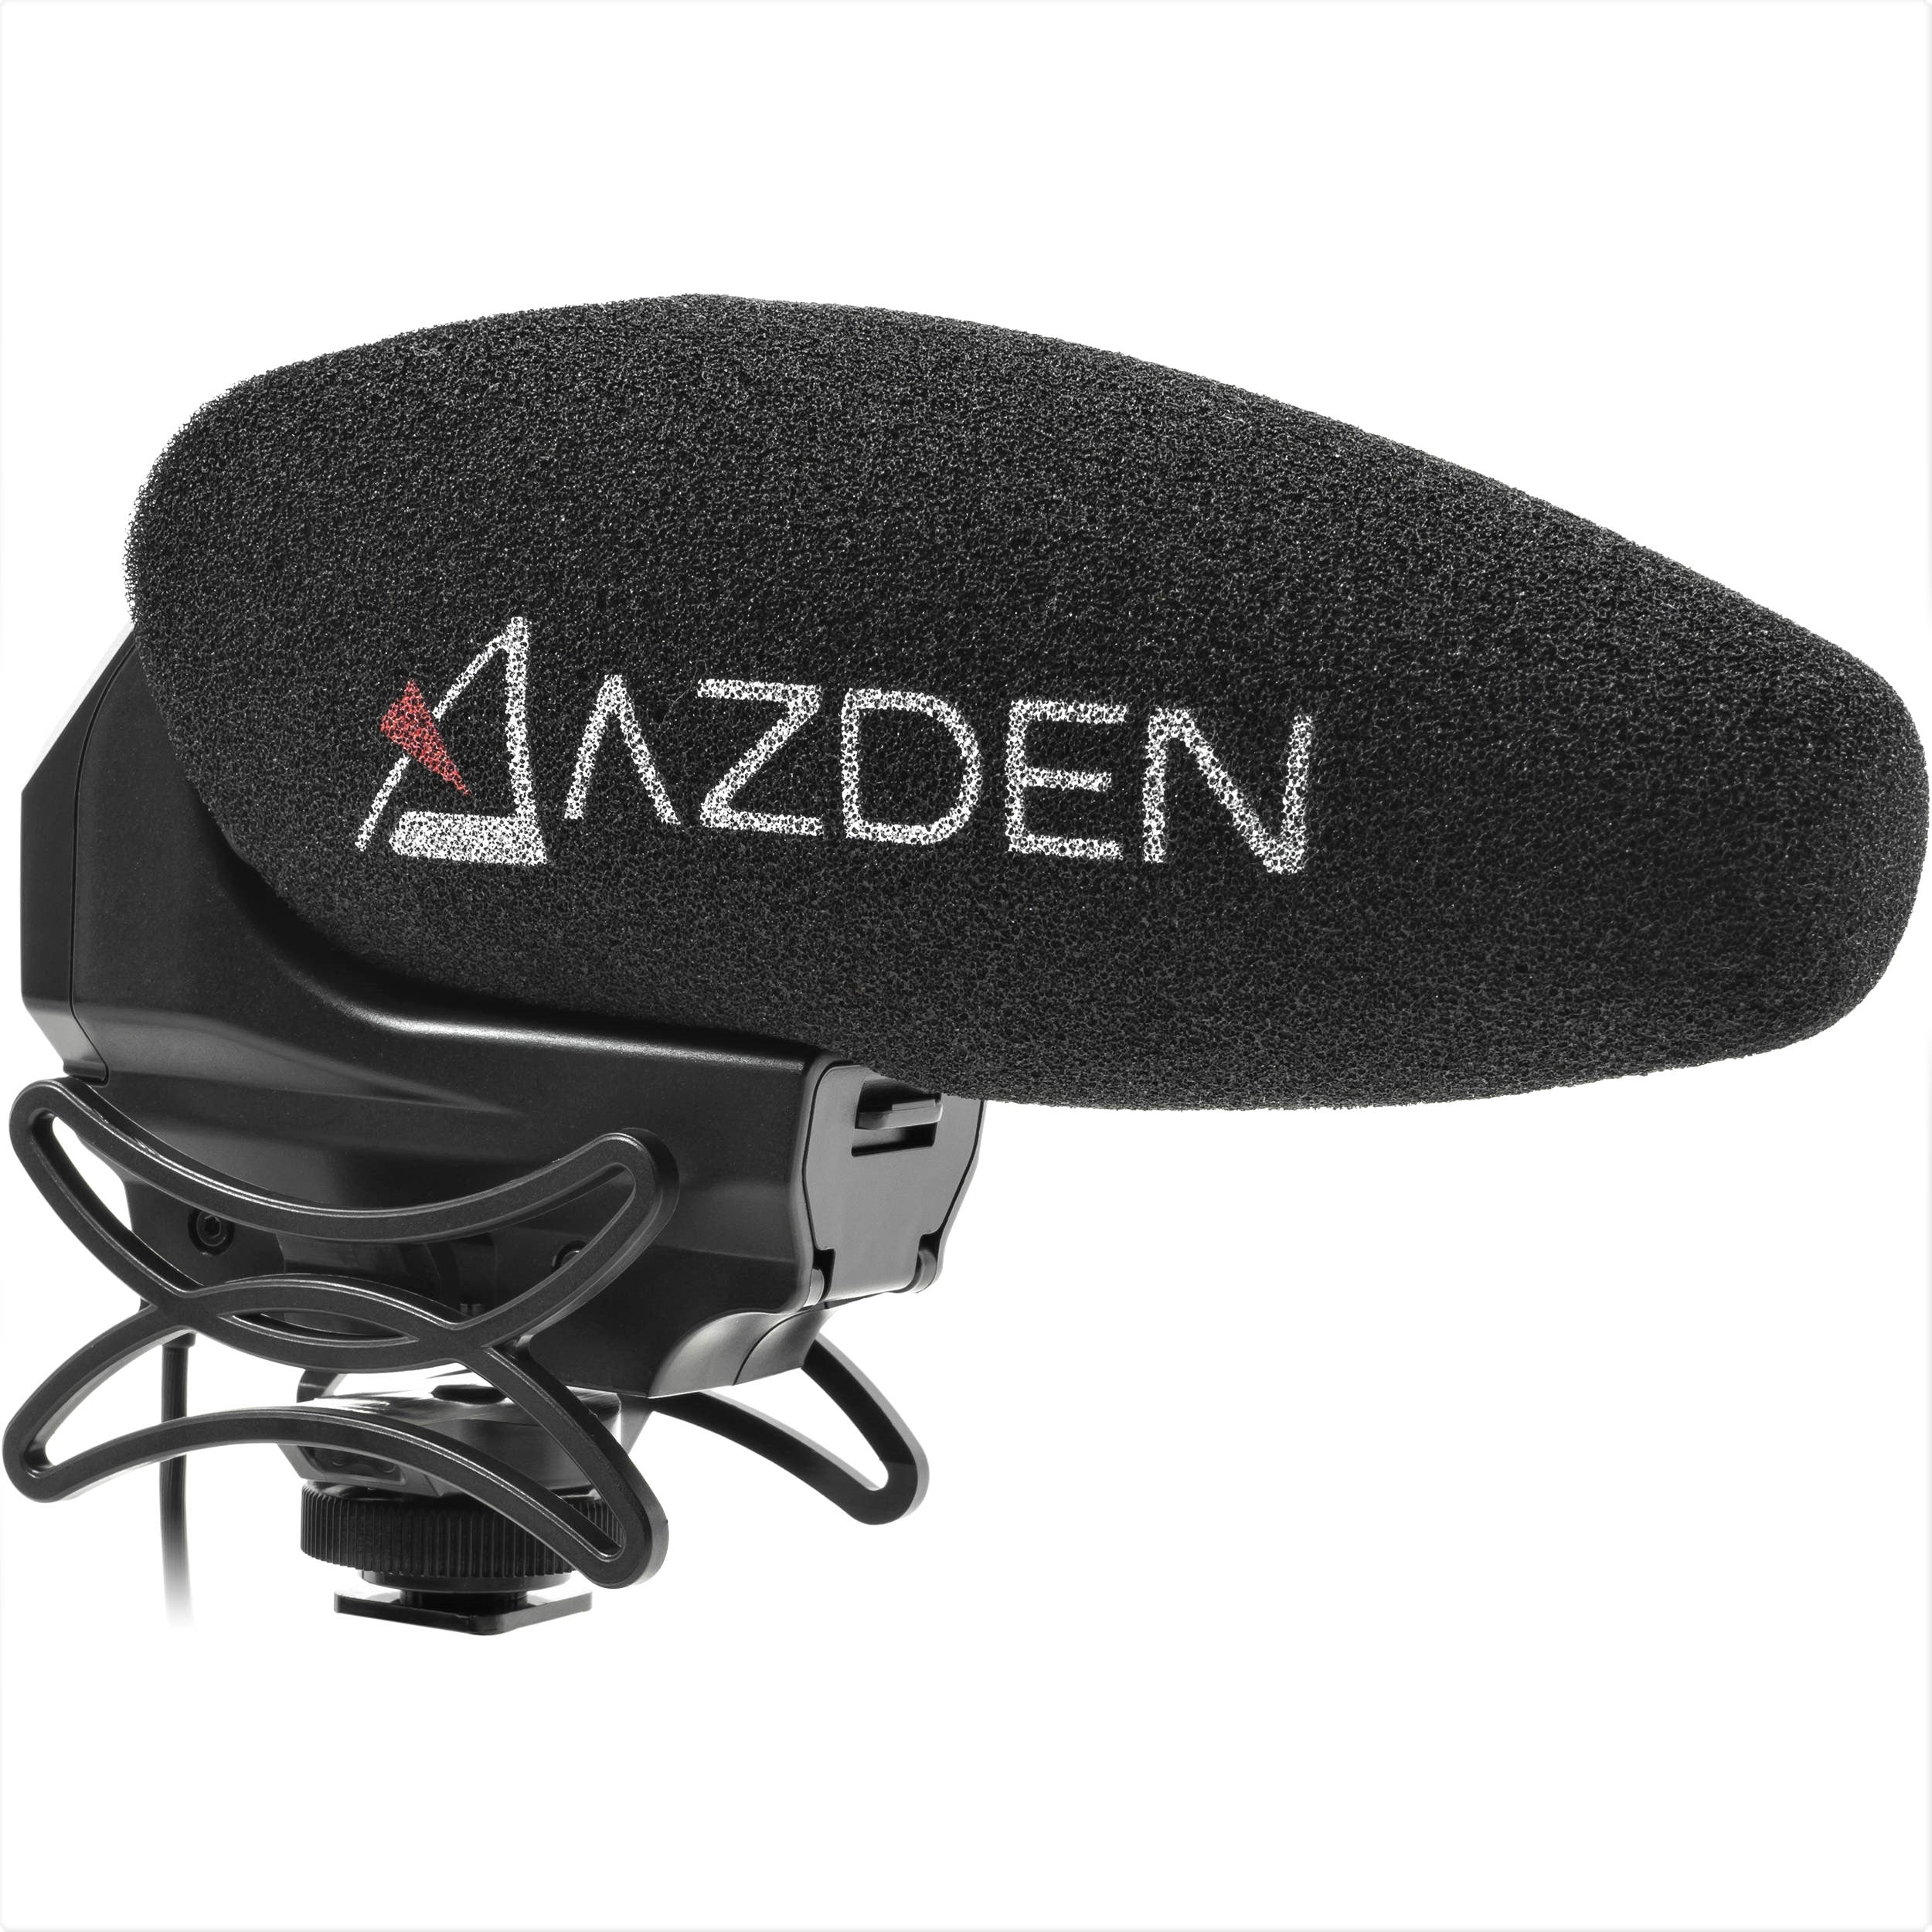 Azden Stereo/Mono Switchable Video Mic with +20dB Boost